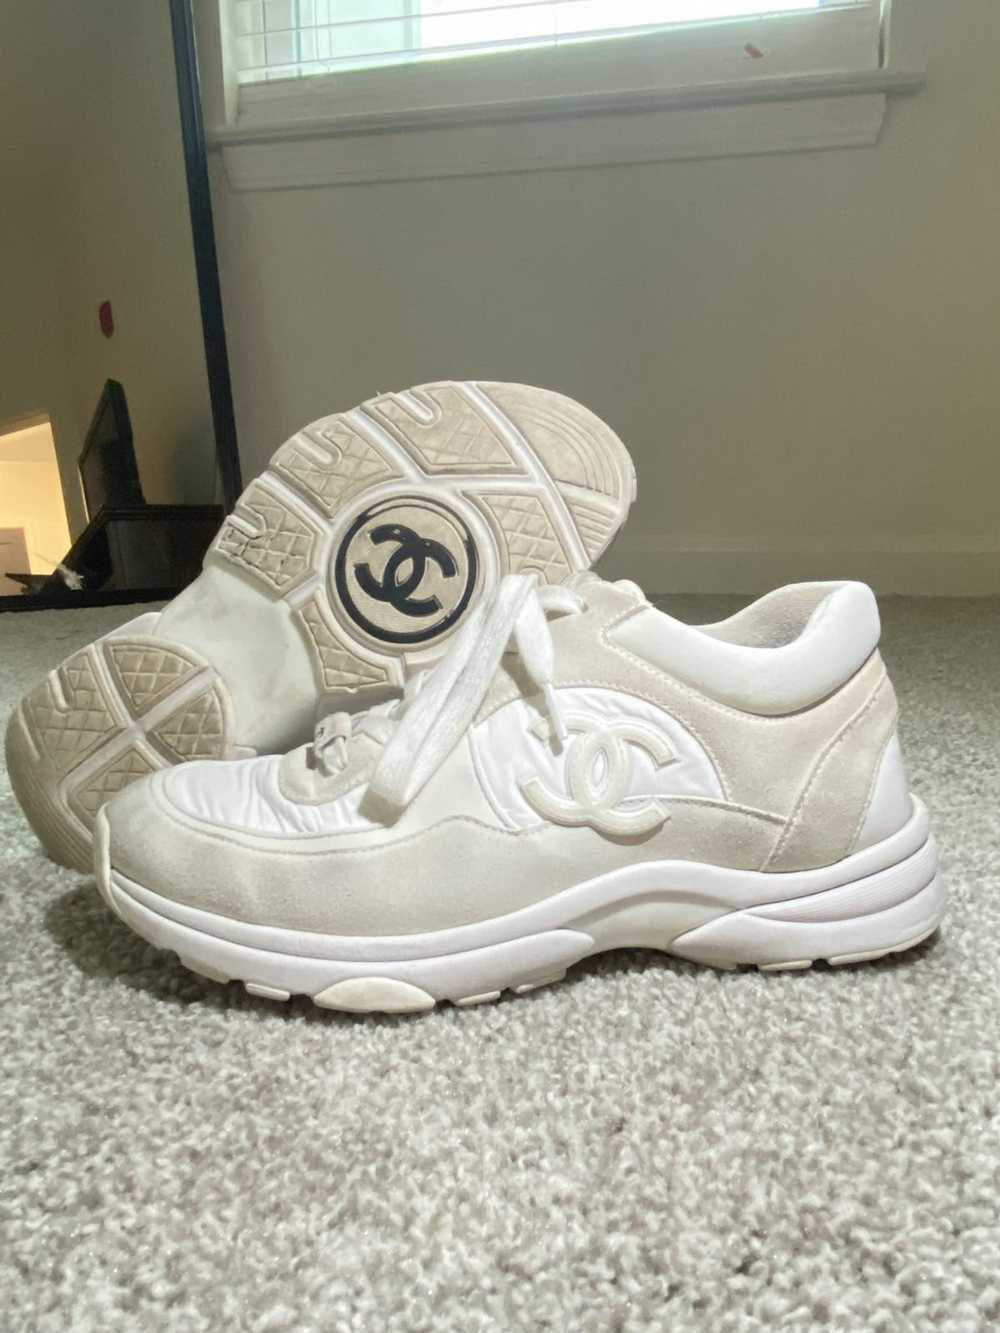 CHANEL Fabric Laminated Calfskin Stretch CC Womens Sneakers 37